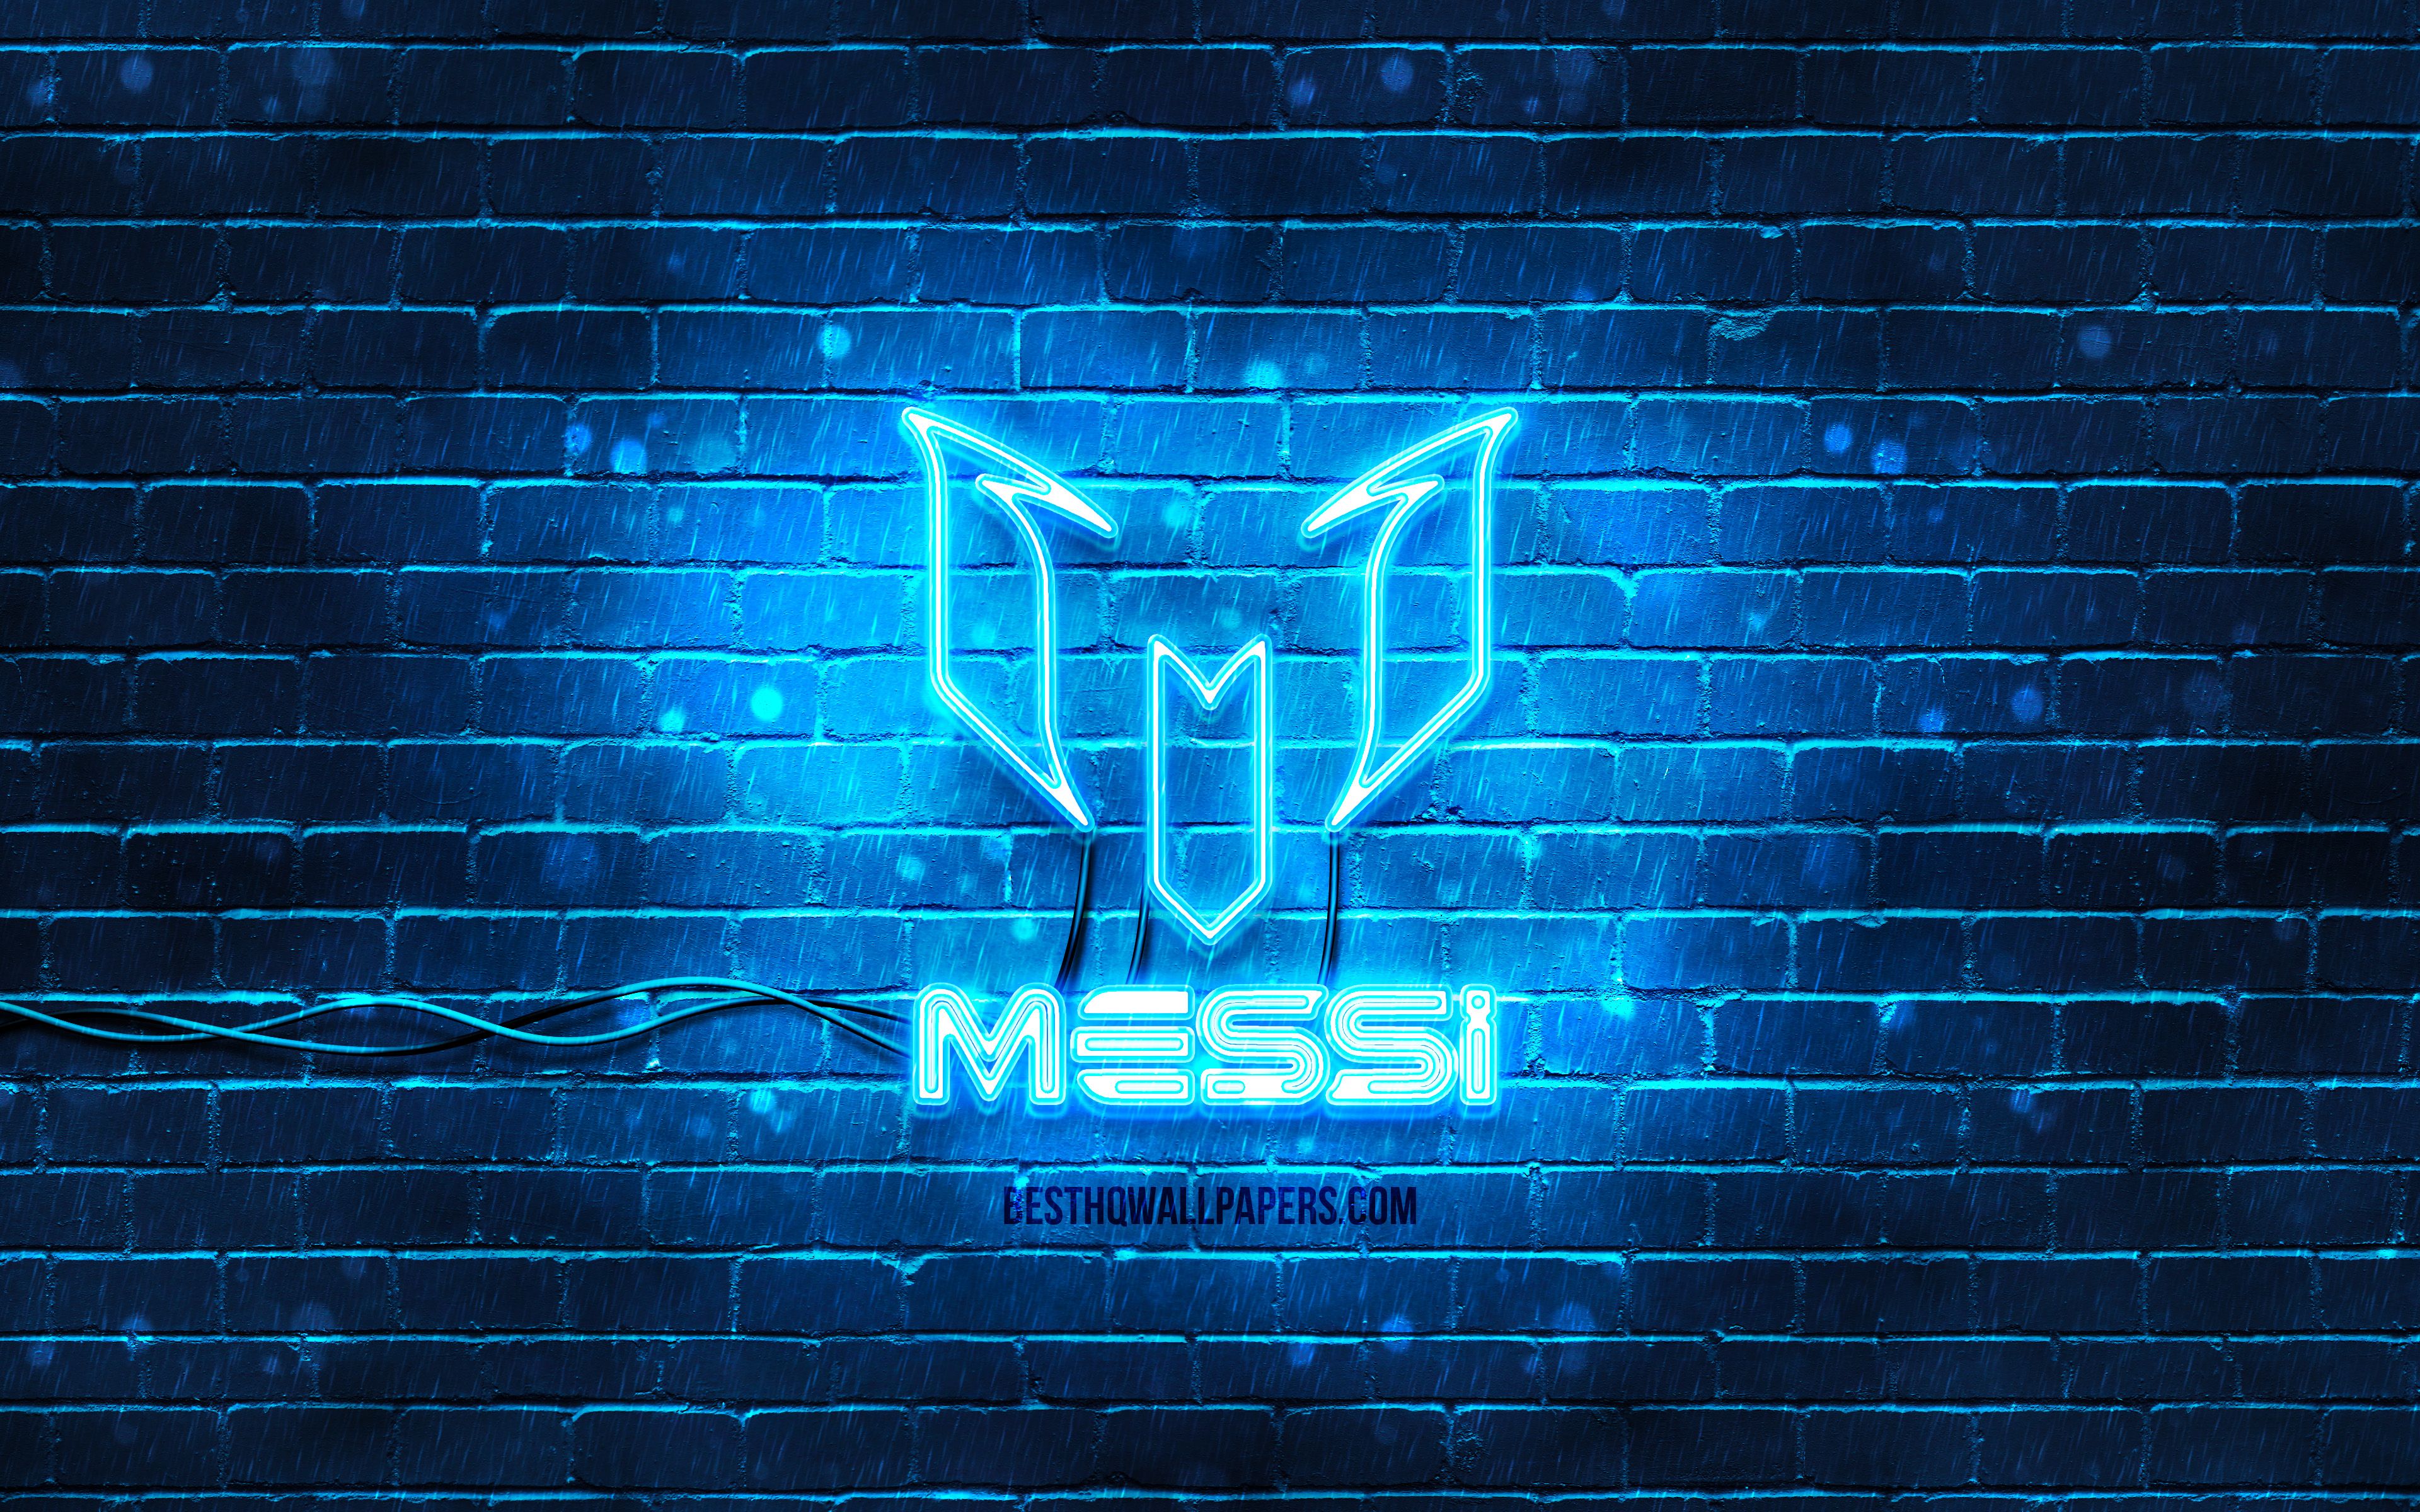 Download wallpaper Lionel Messi blue logo, 4k, blue brickwall, Leo Messi, fan art, Lionel Messi logo, football stars, Lionel Messi neon logo, Lionel Messi for desktop with resolution 3840x2400. High Quality HD